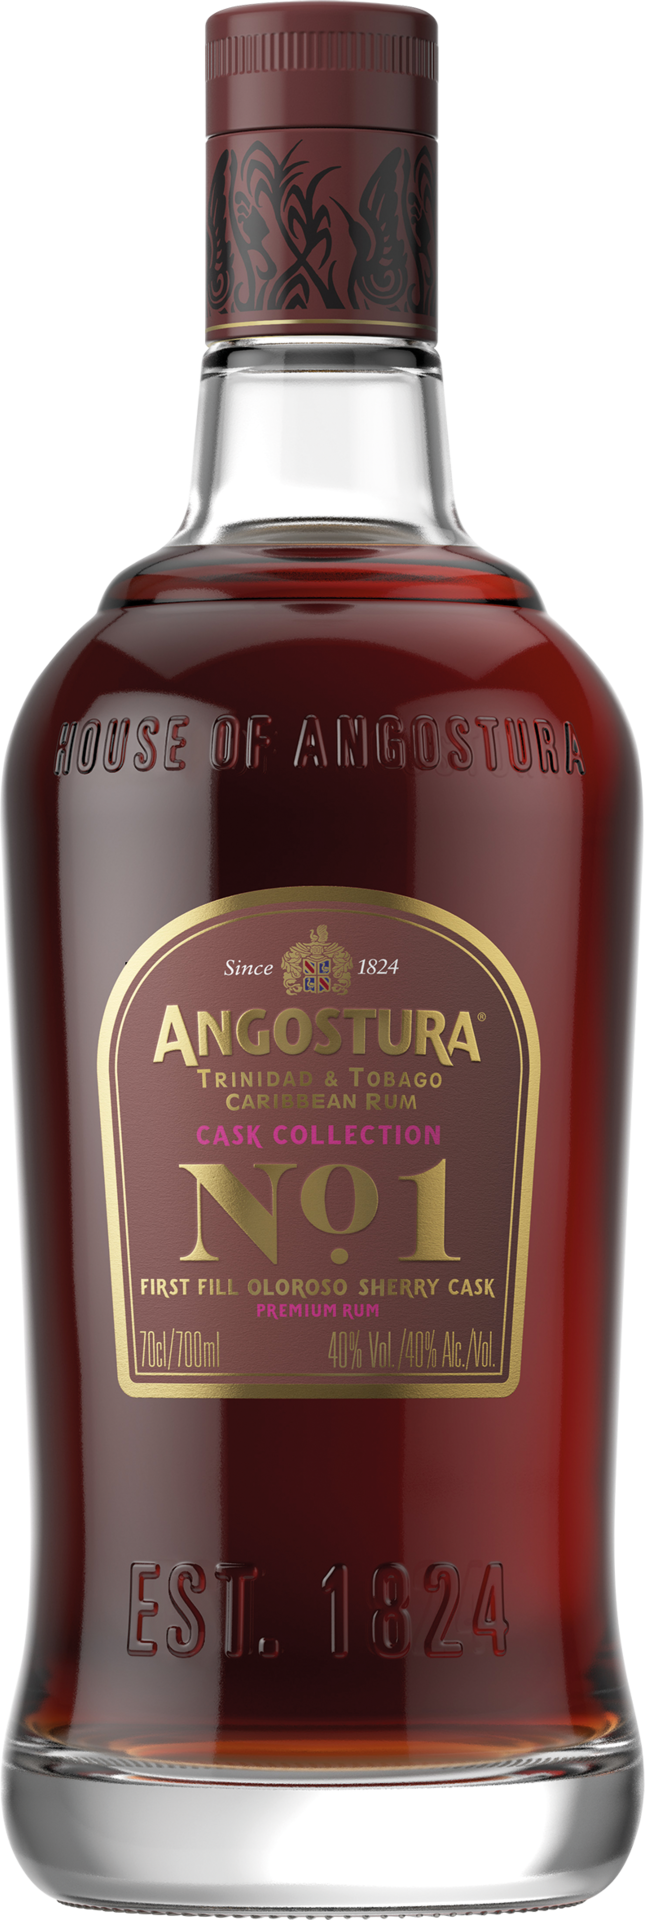 Angostura Cask No.1, Ed. 3 Oloroso Cask First Filled Olorso Sherry